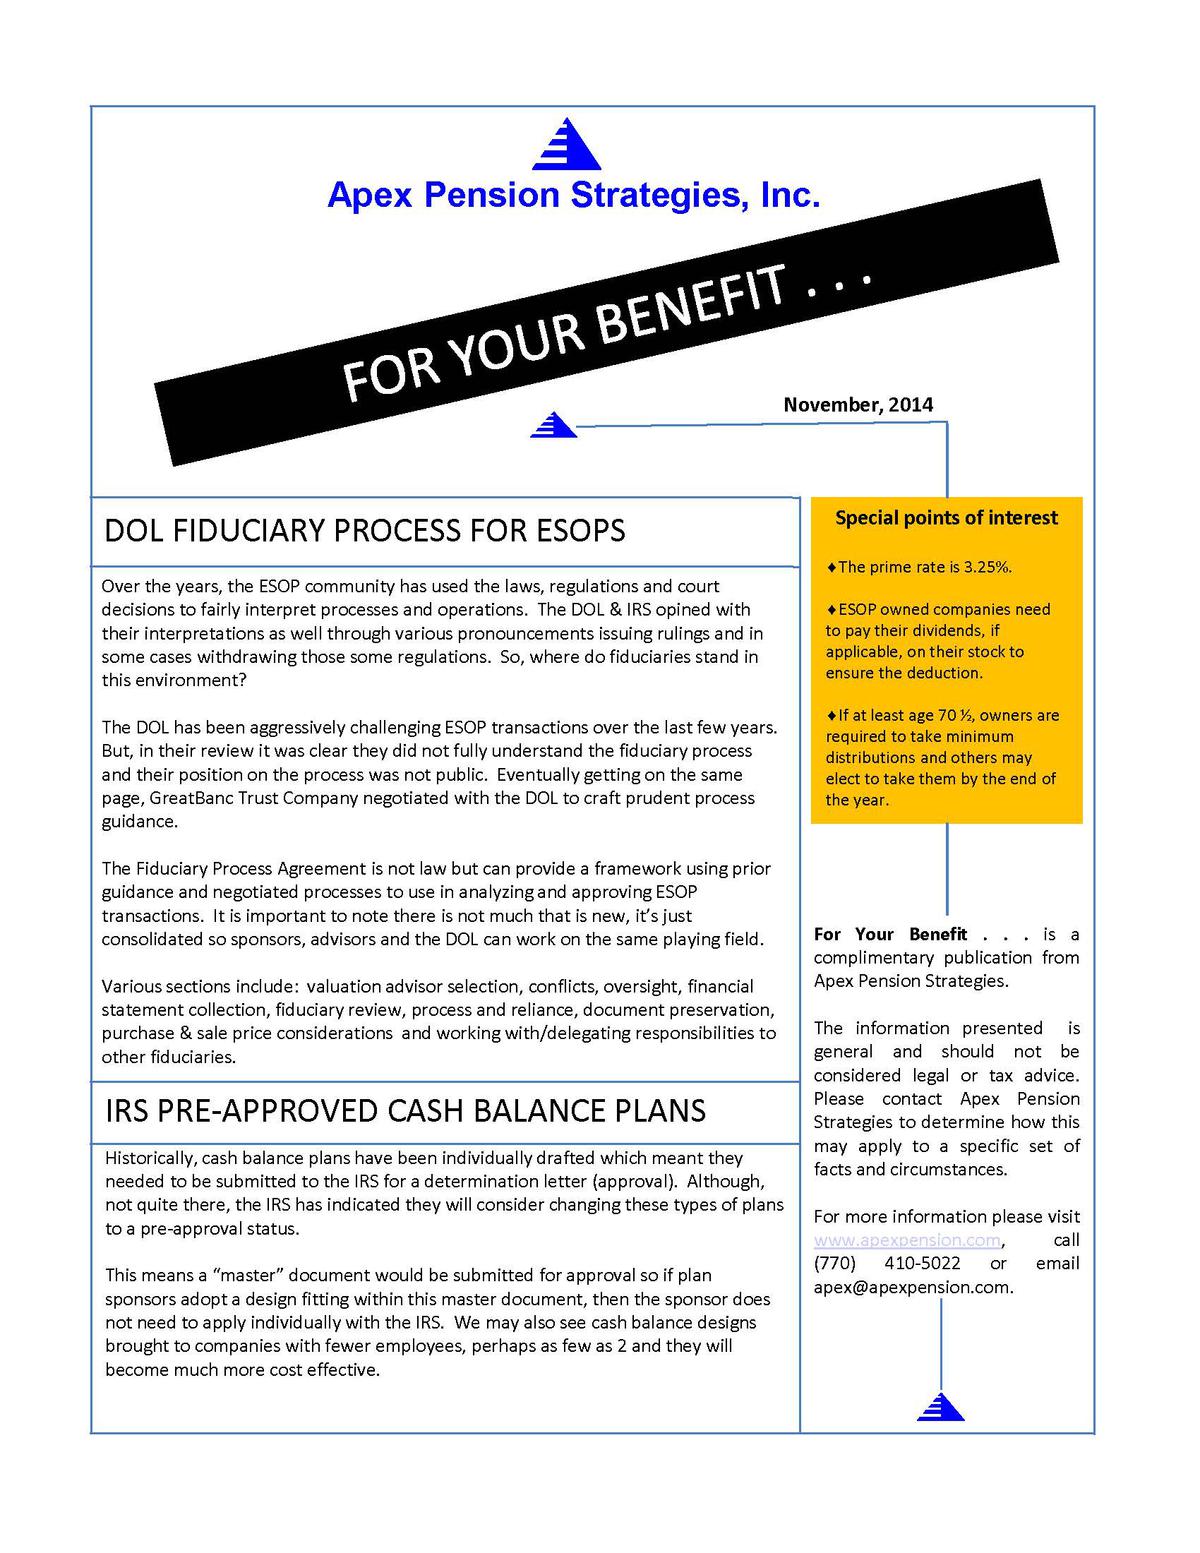 IRS Preapproved Cash Balance Plans